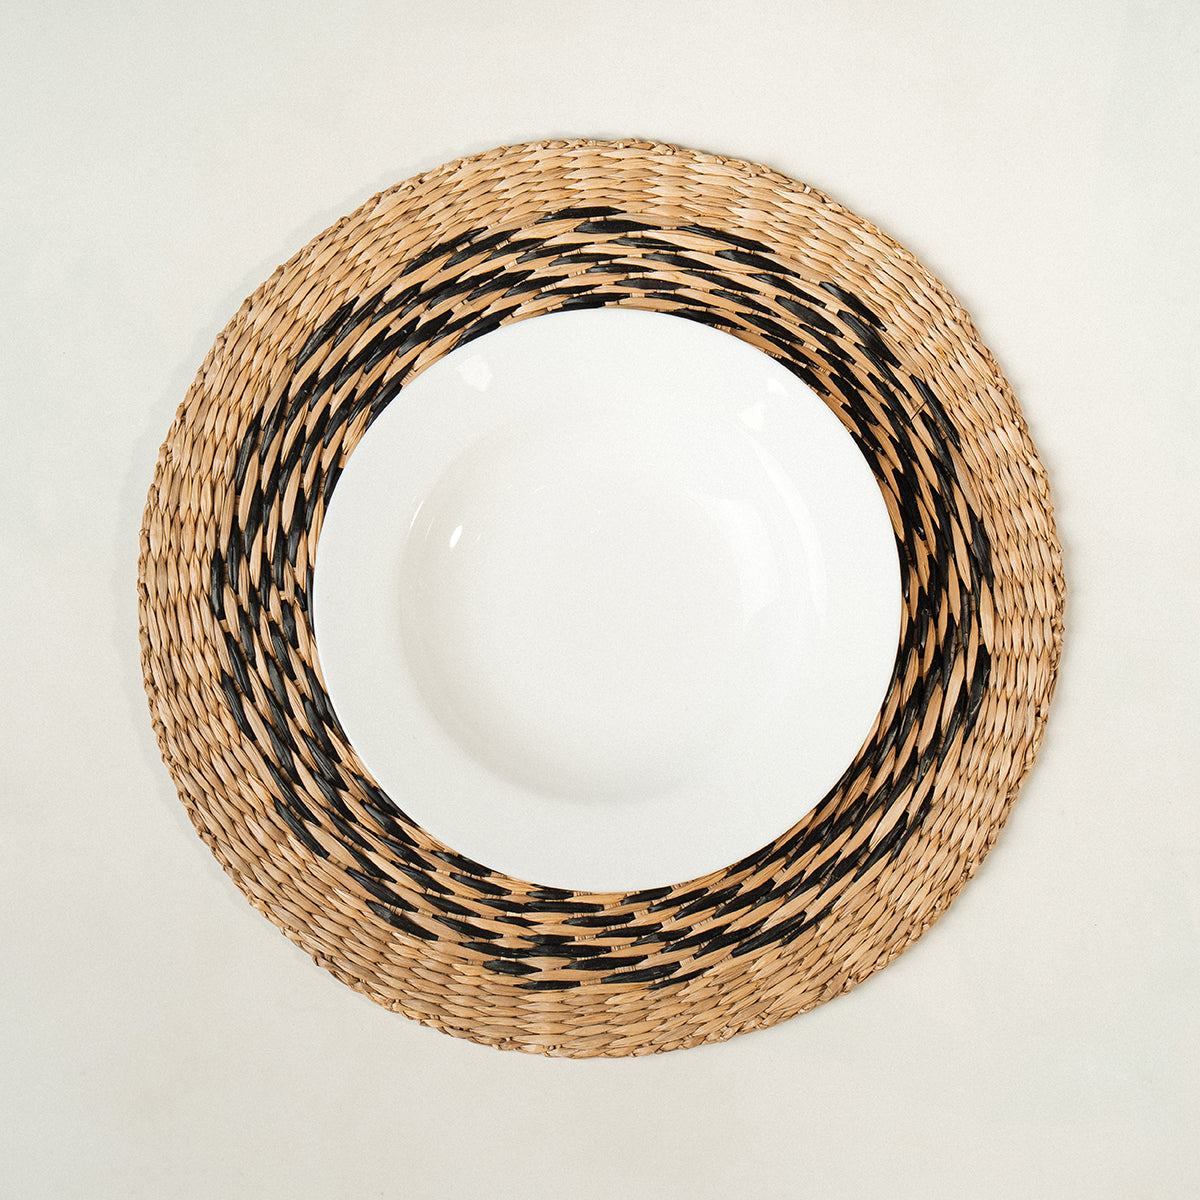 woven seagrass placemat set of 6